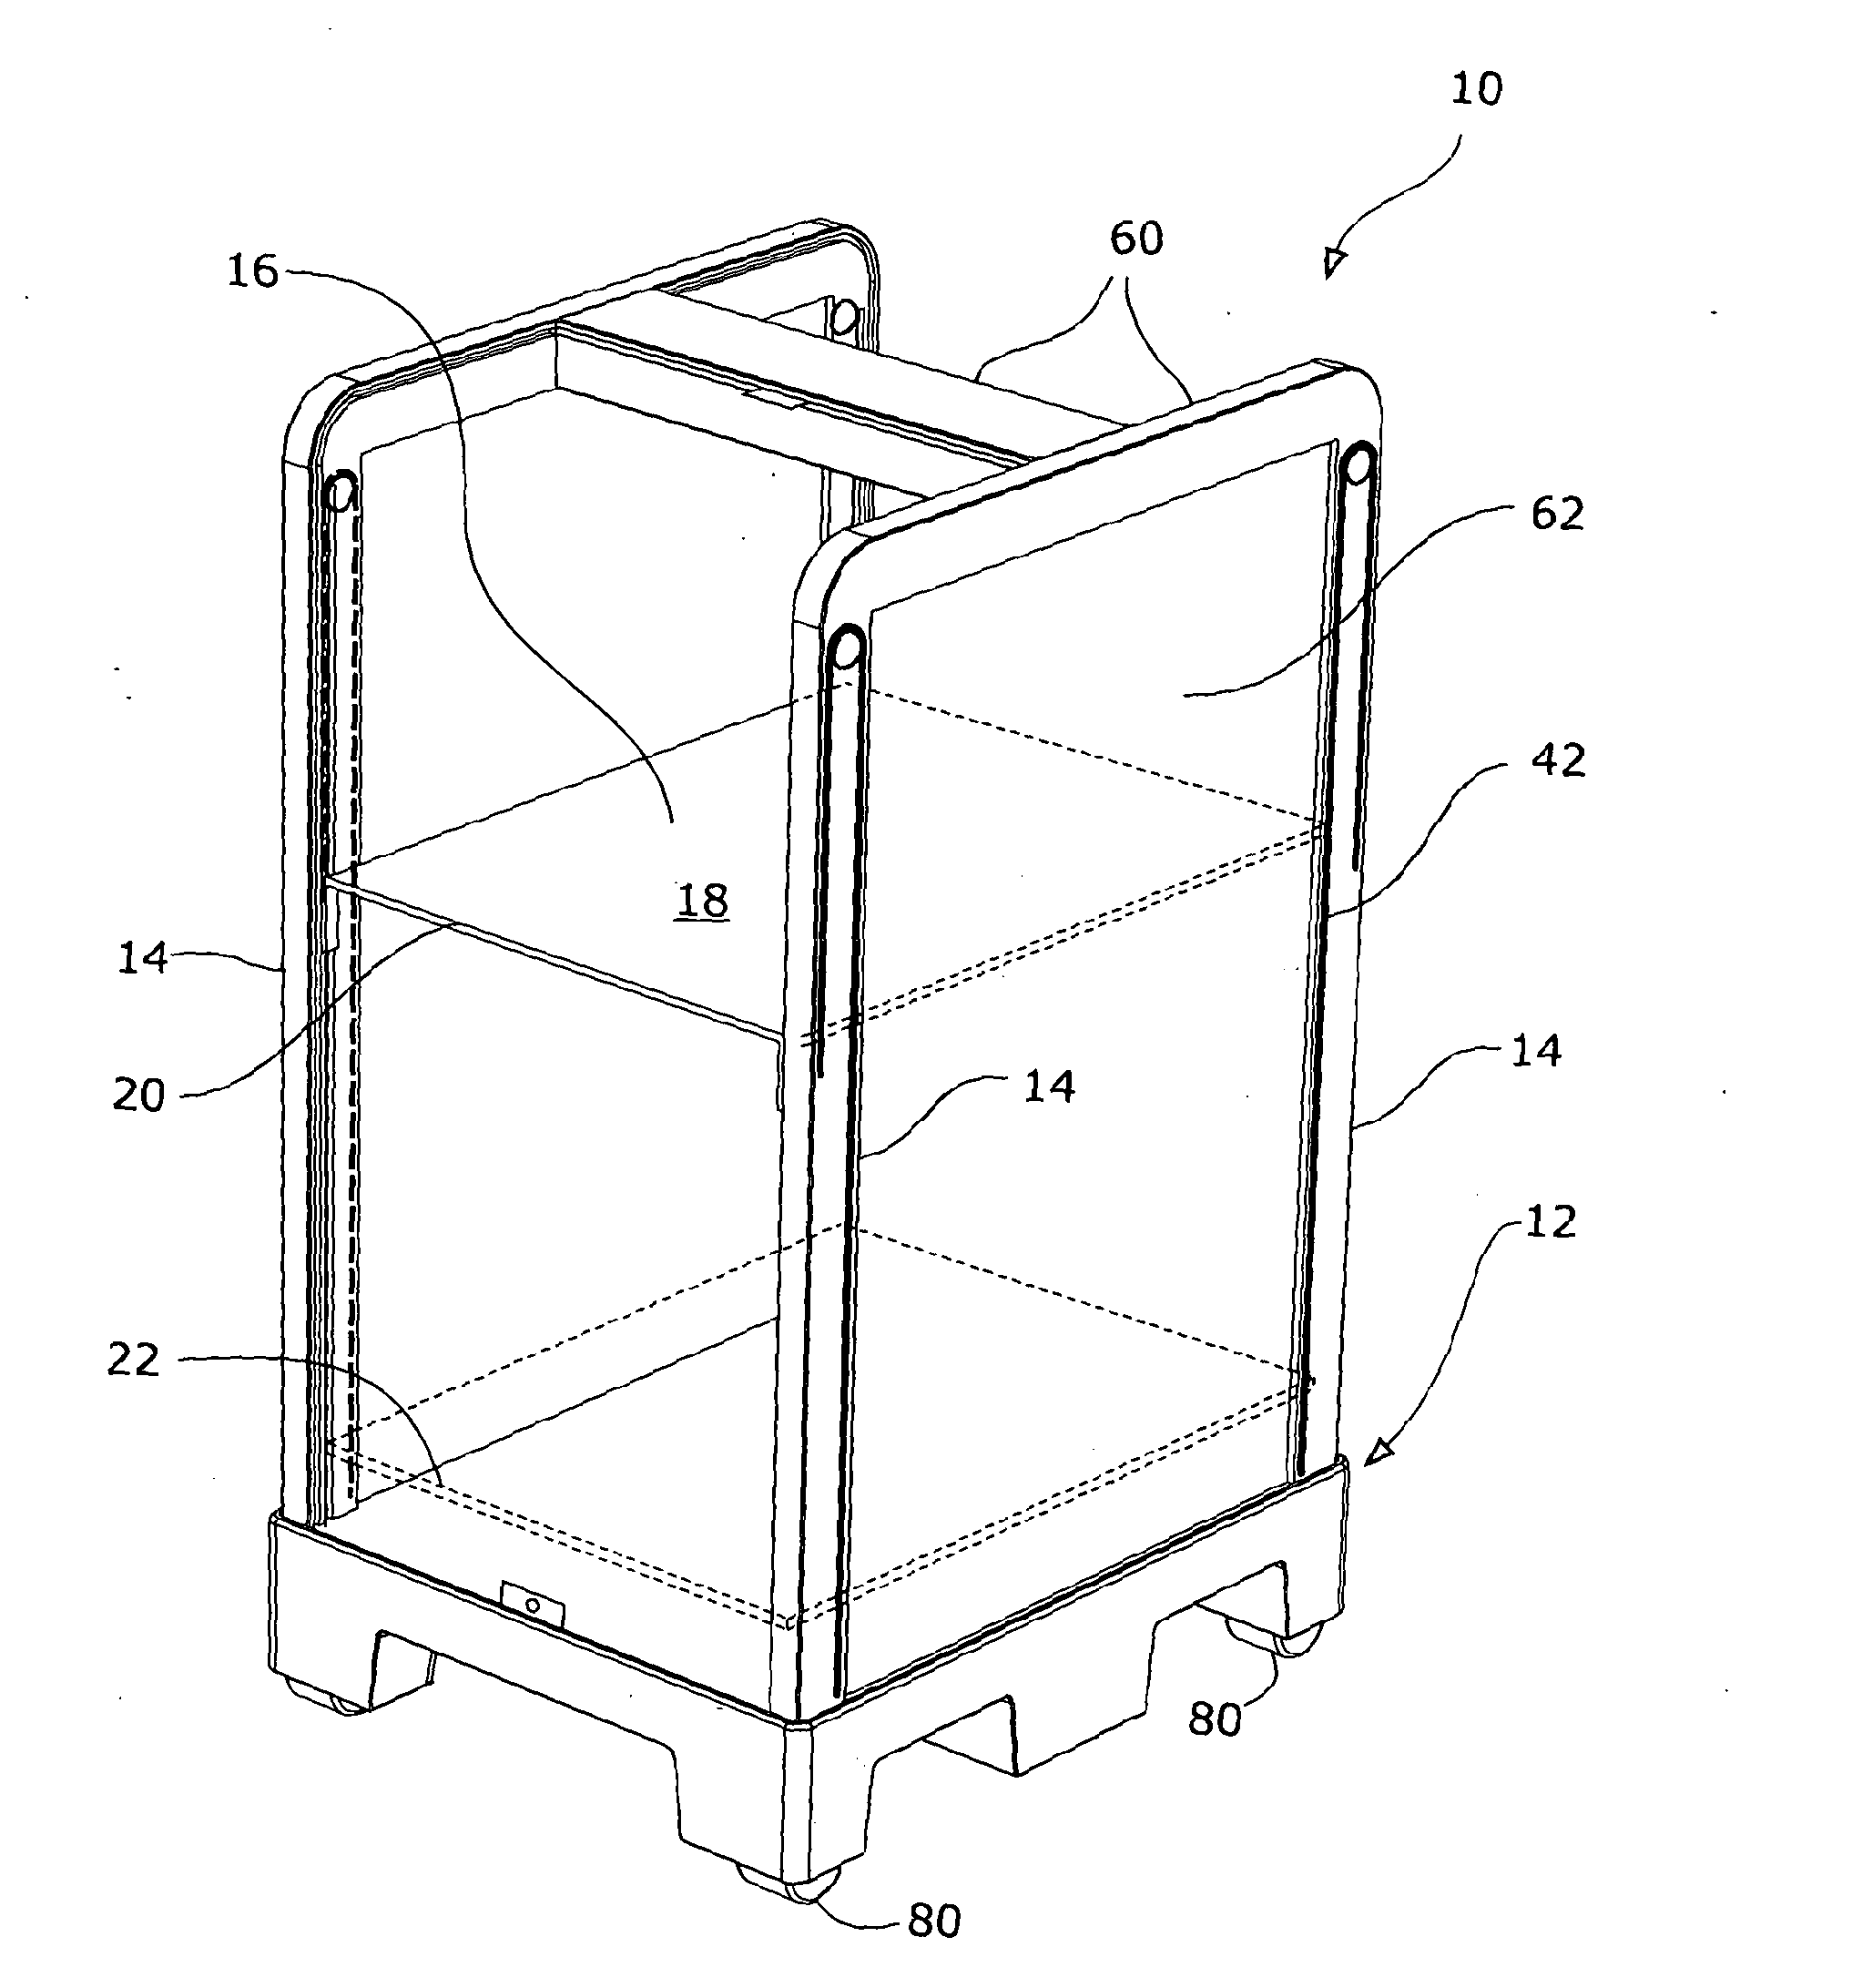 Apparatus for storing a plurality of objects such as trays